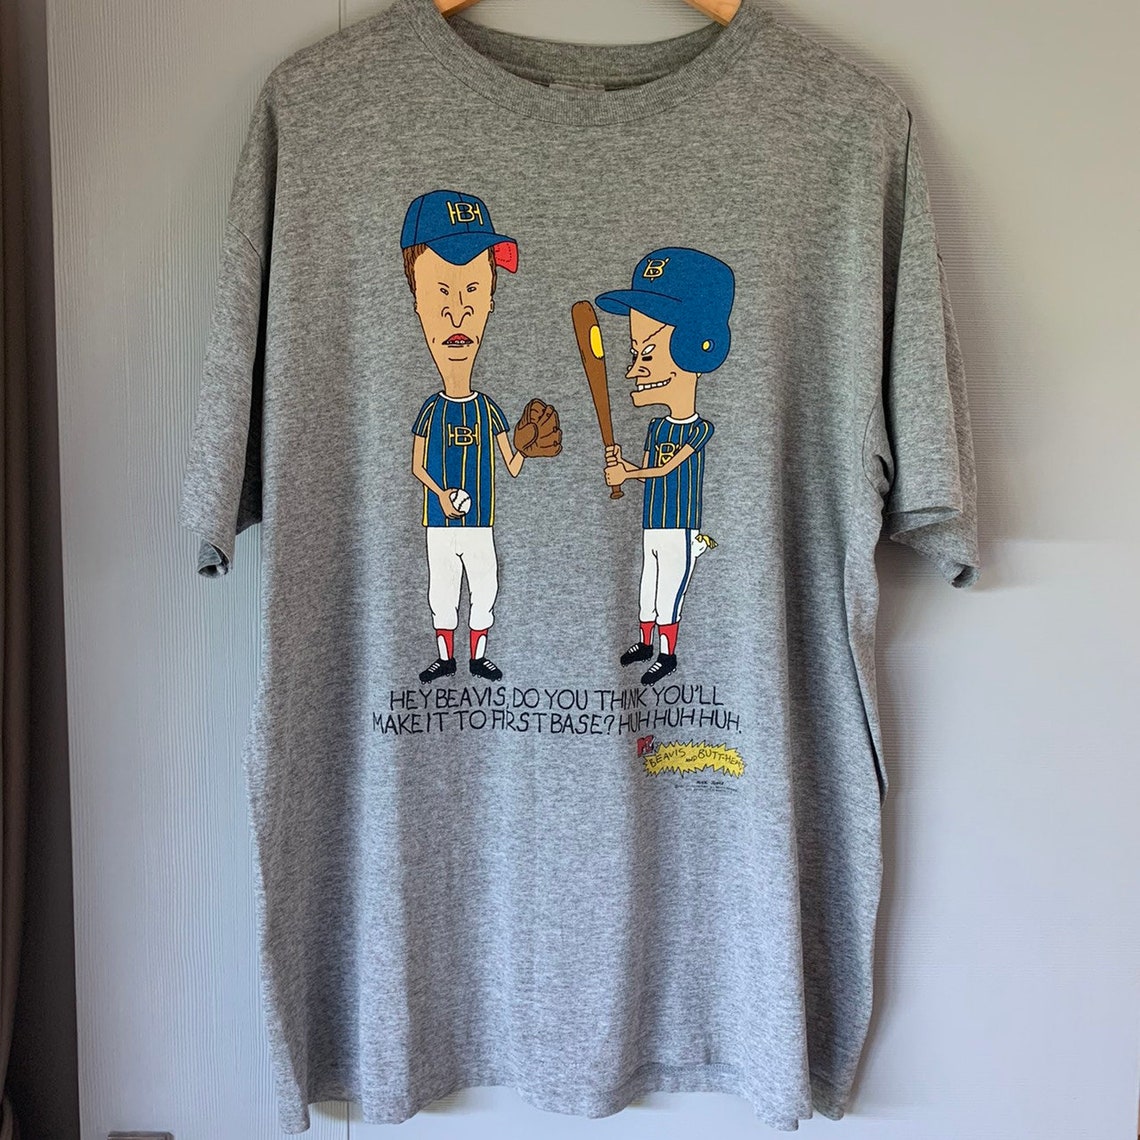 Vintage 90s Beavis and Butthead T Shirt - Etsy